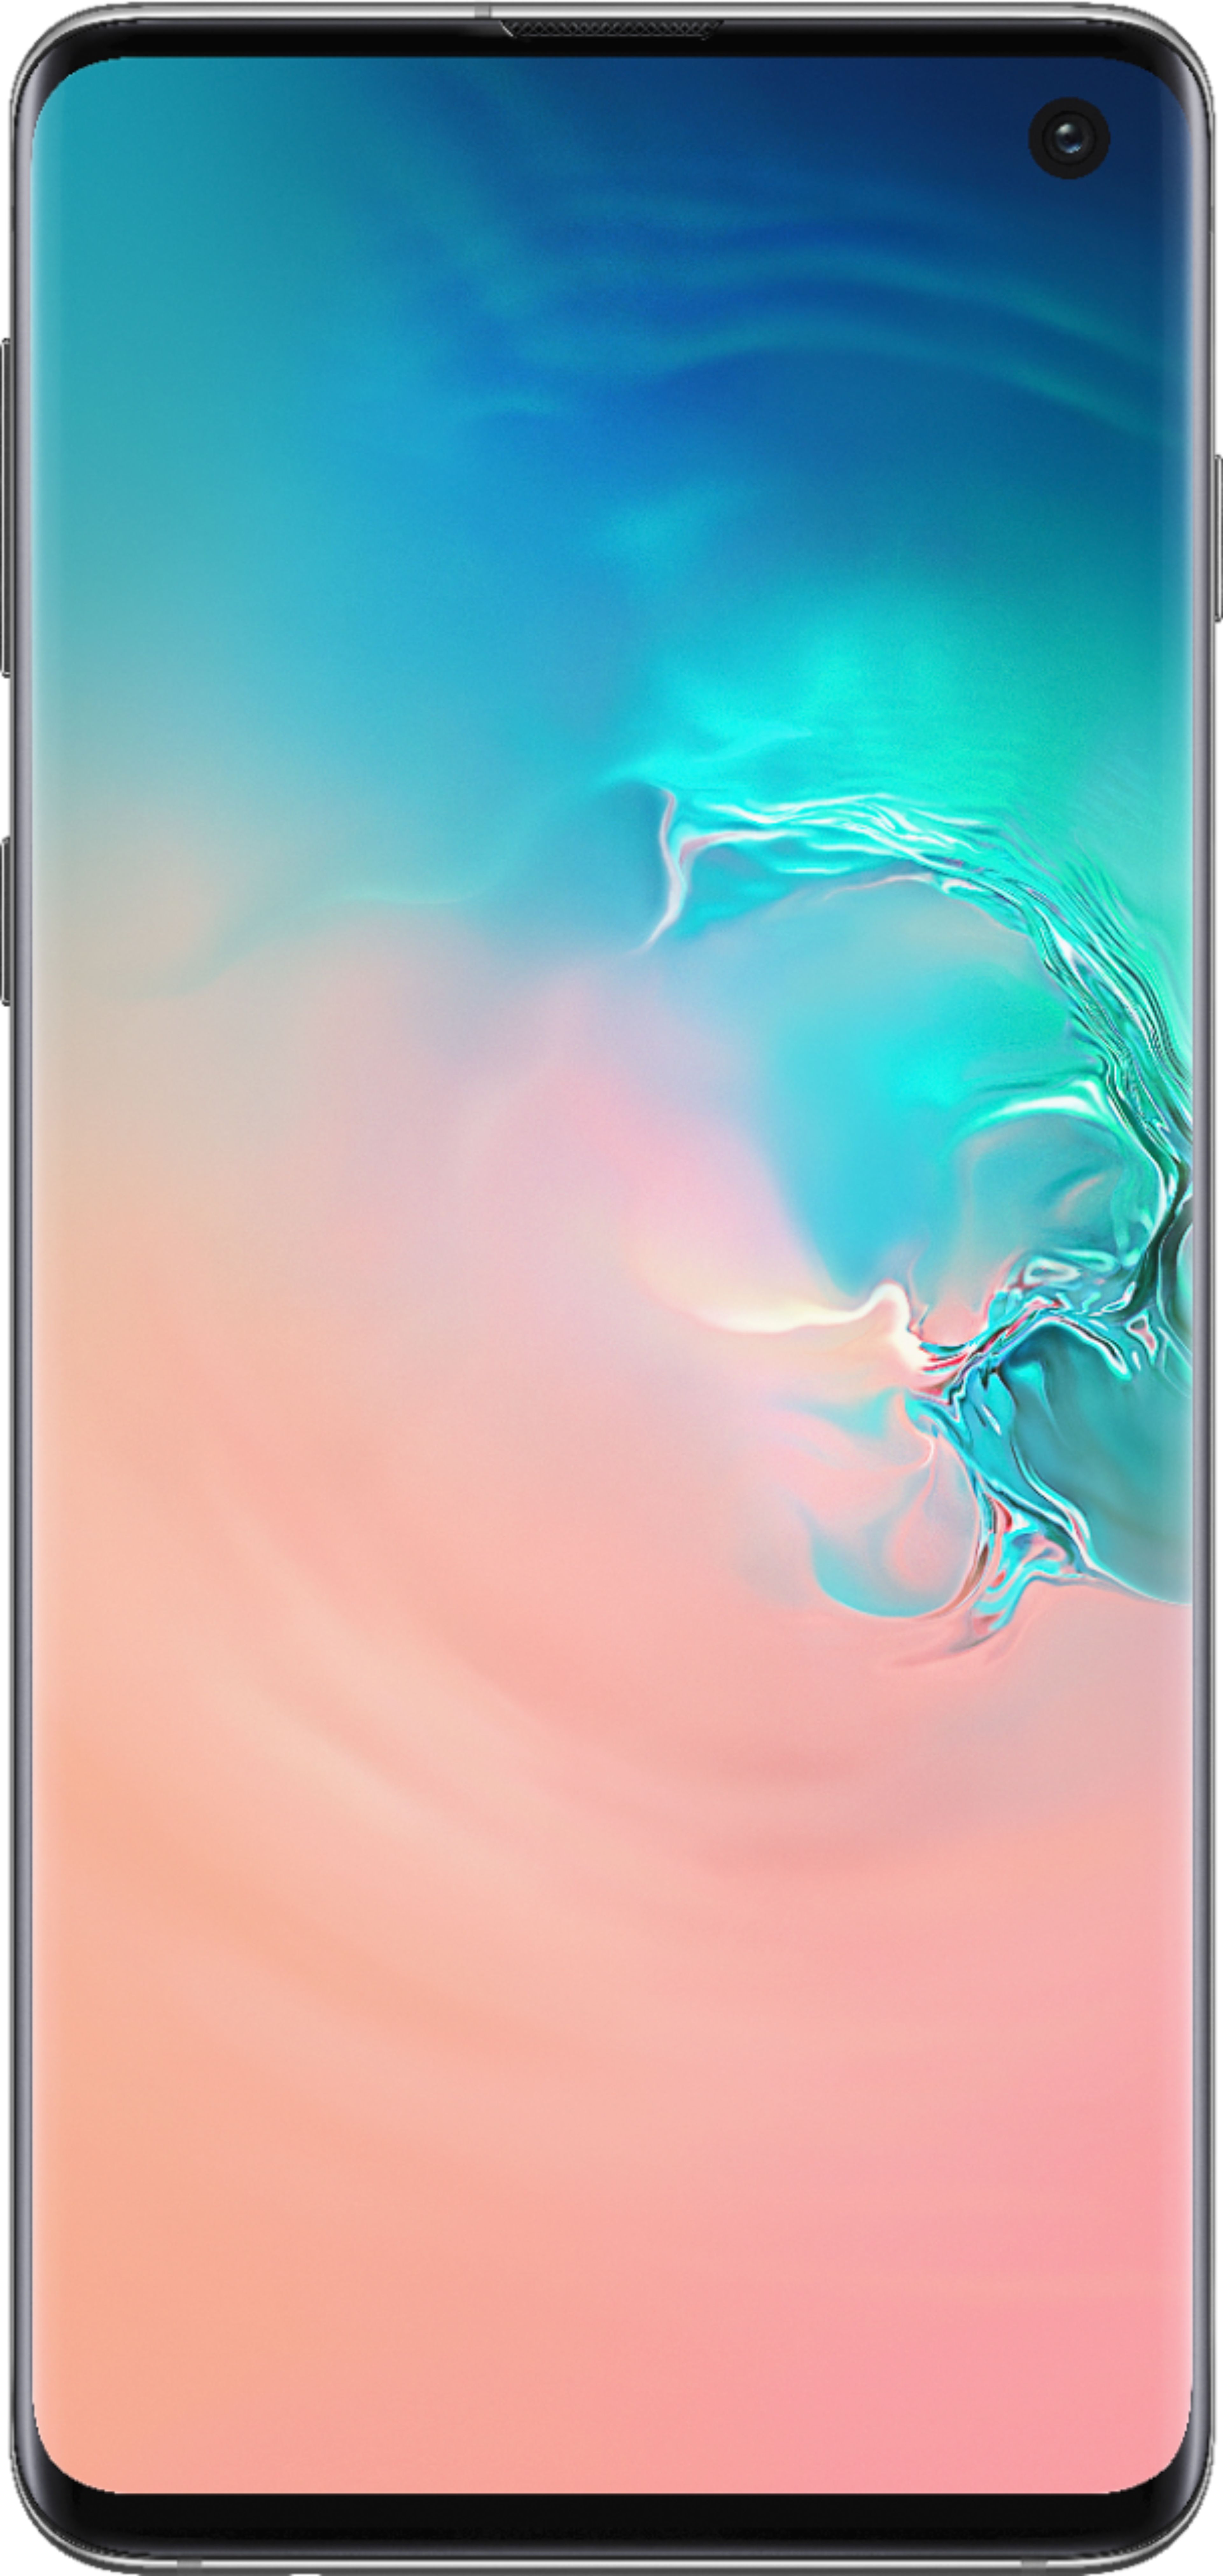 Best Buy Samsung Galaxy S10 With 128gb Memory Cell Phone Prism